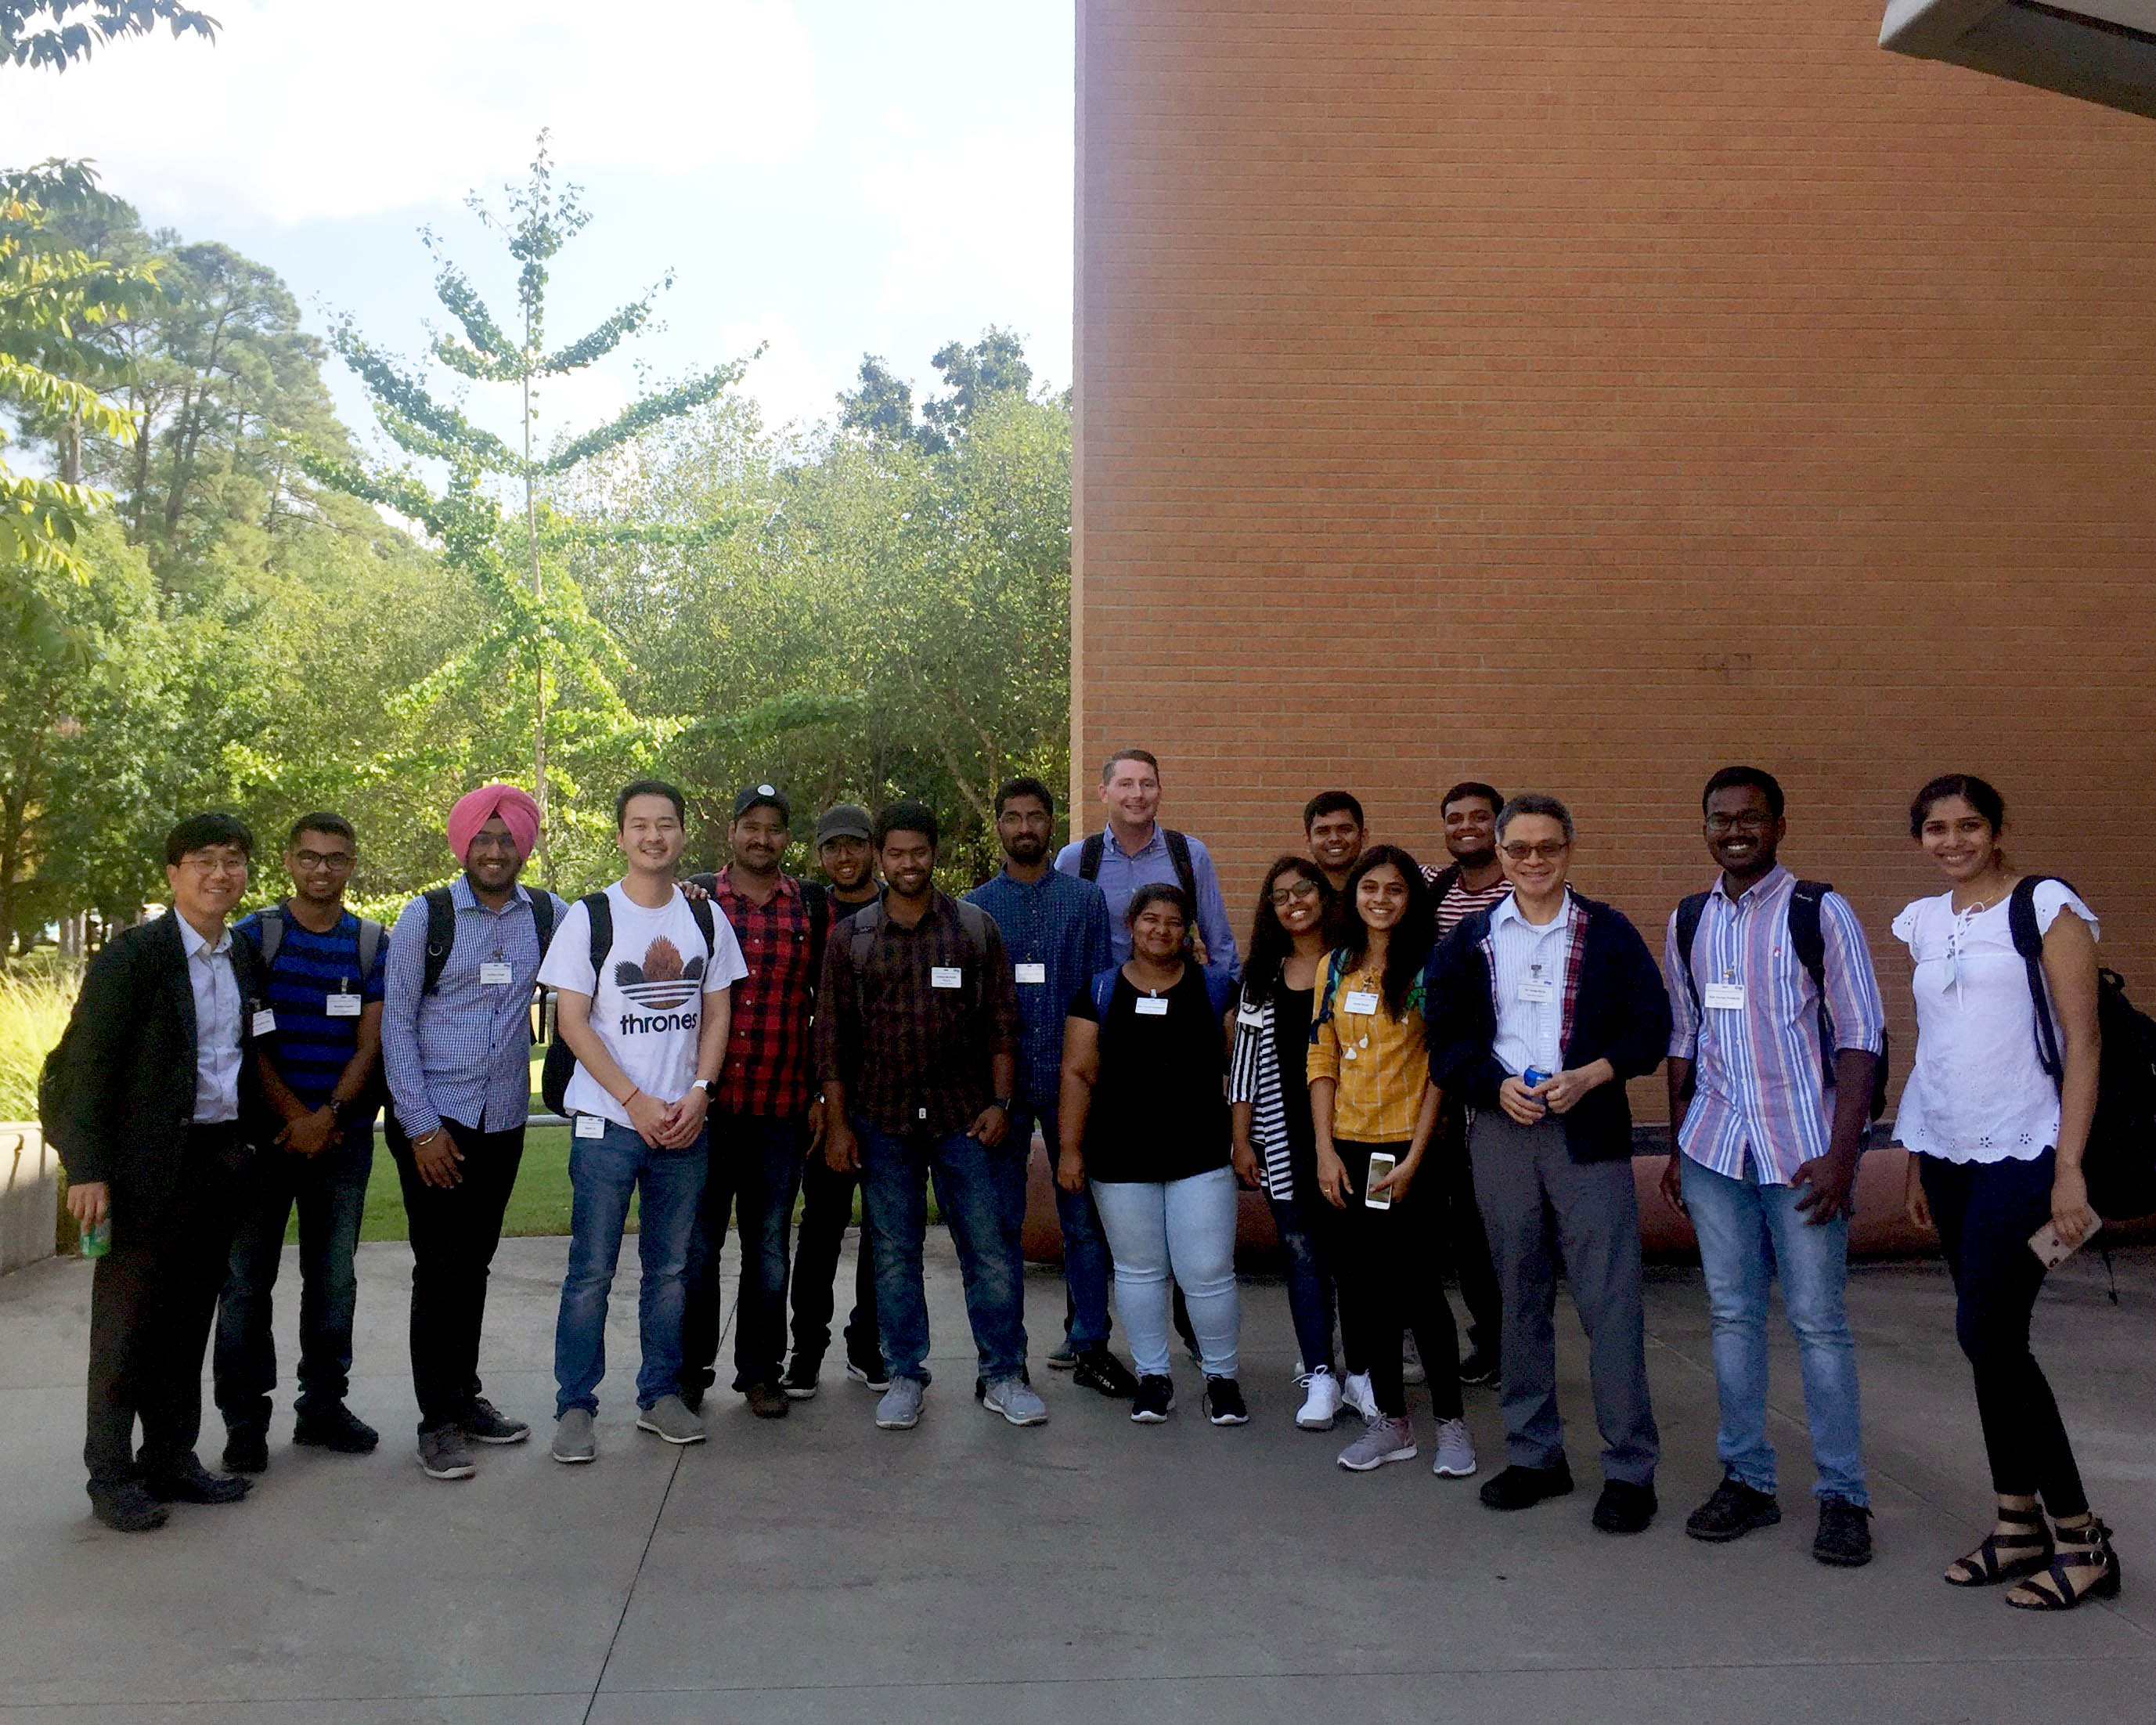 A group of computer science students and 3 faculty members standing outside for a group picture where they attended a Data Science Workshop in Little Rock, AR.